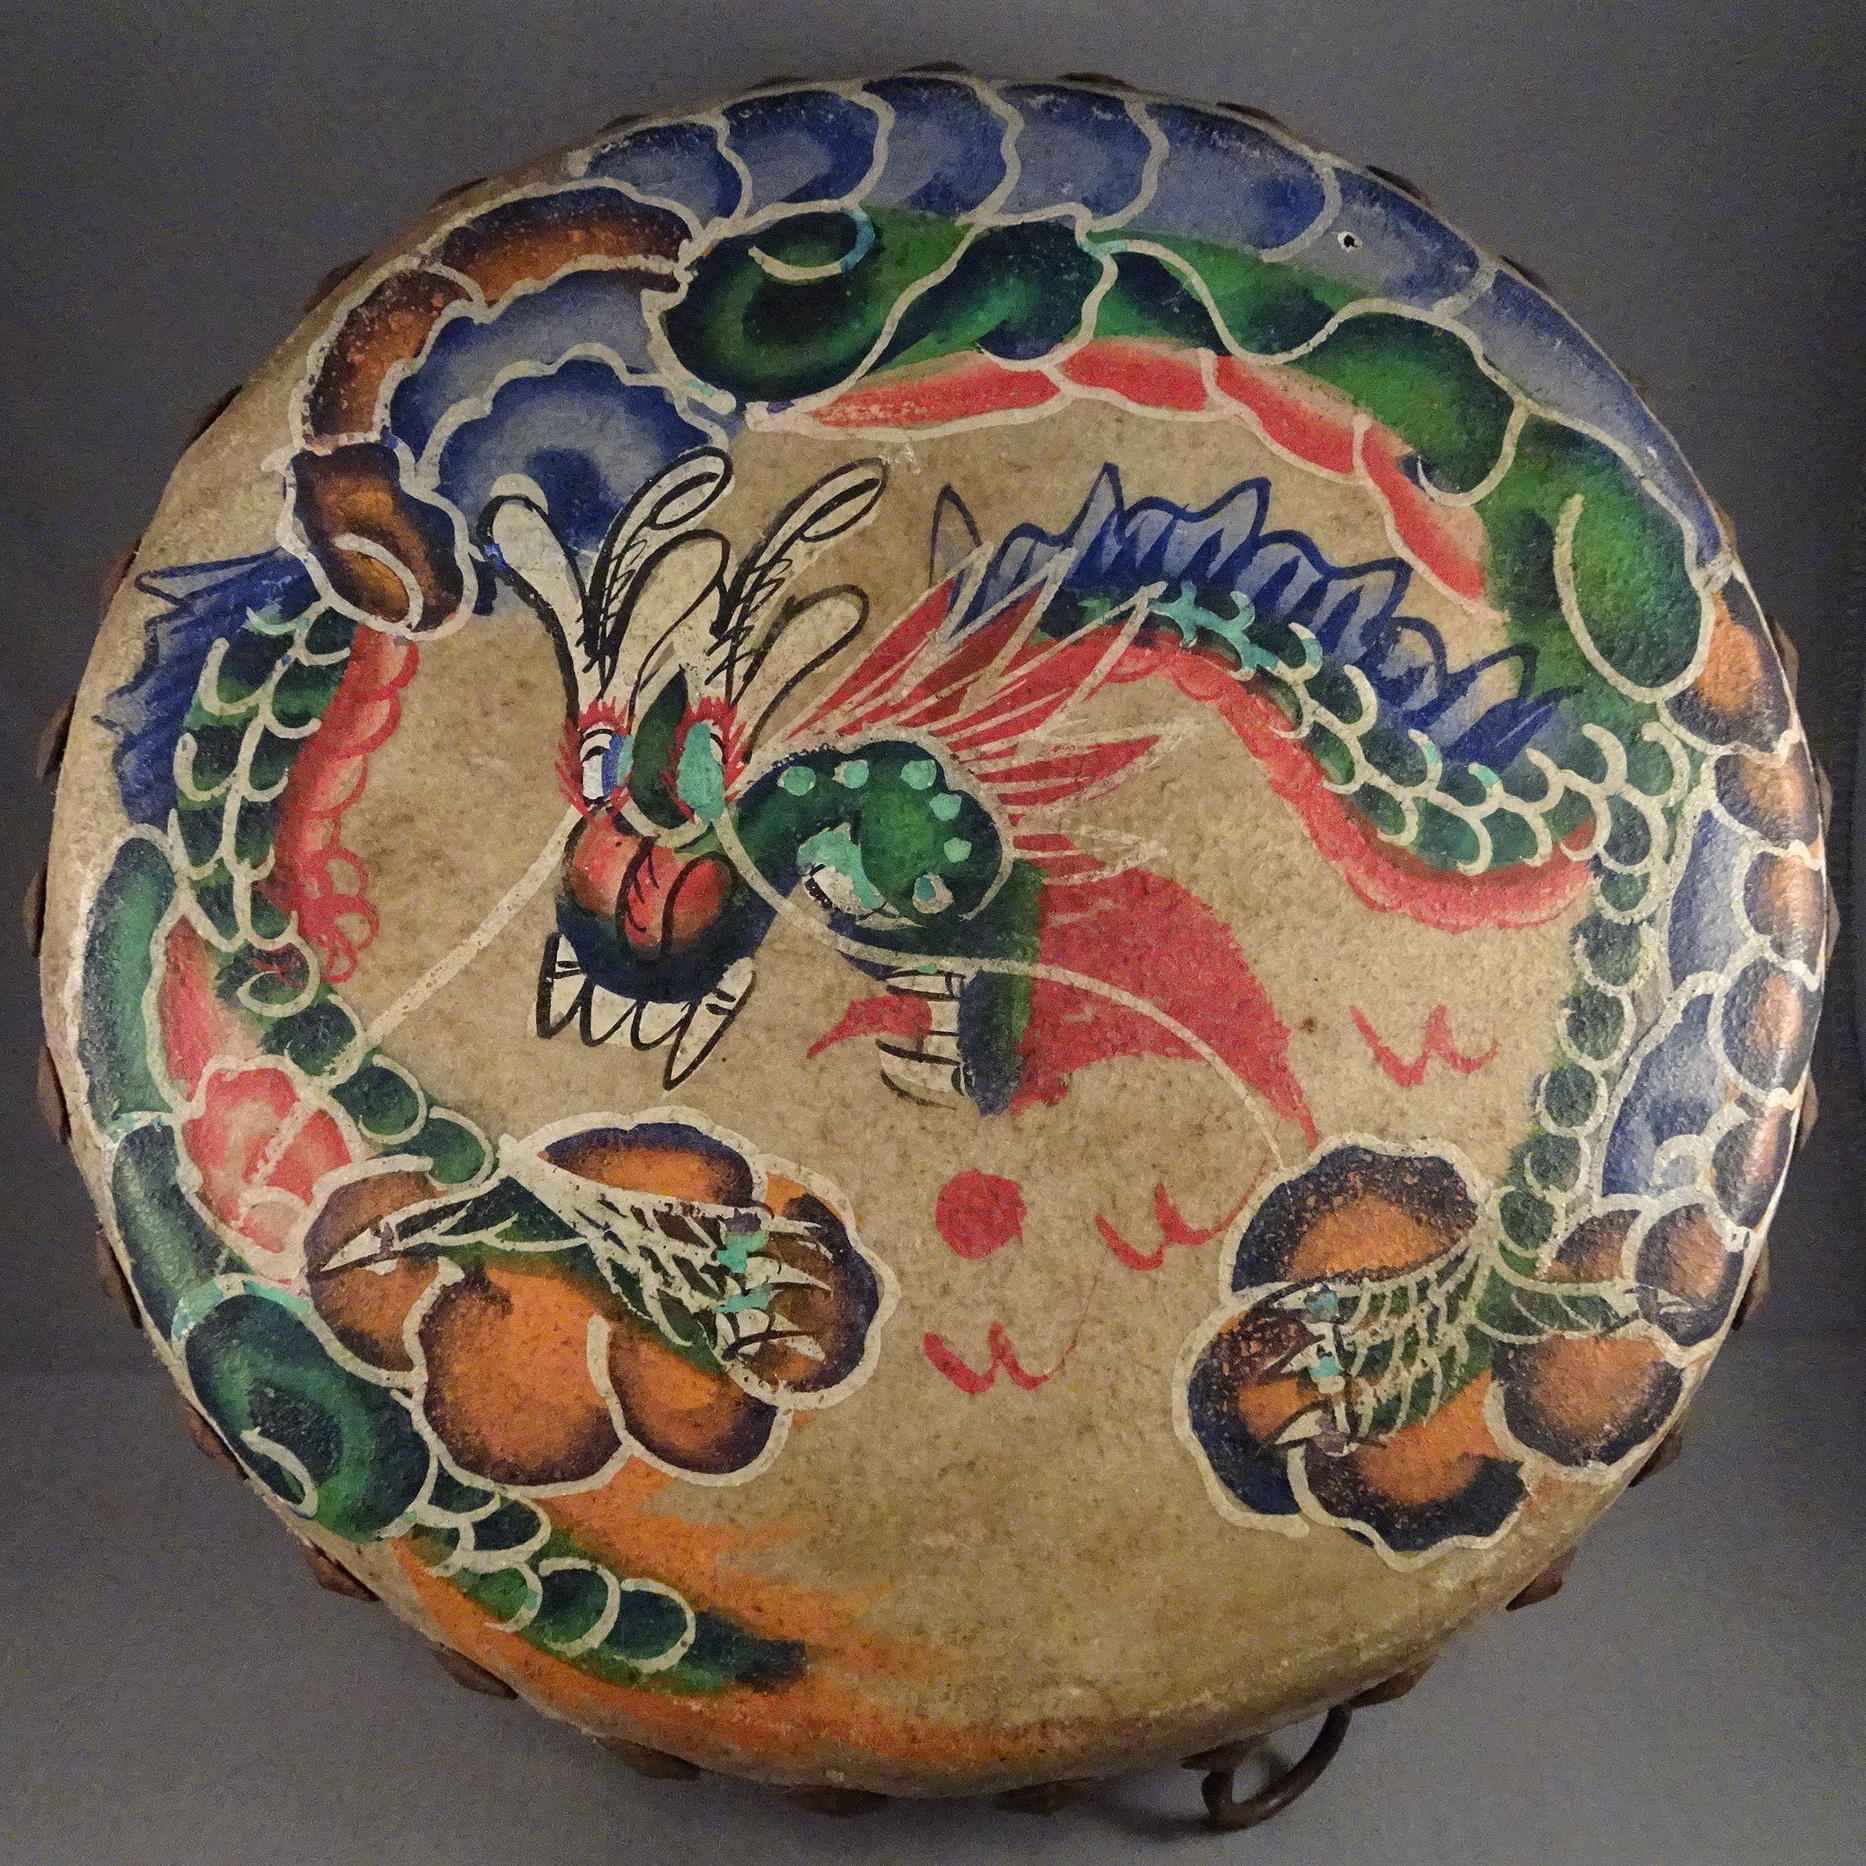 Chinese low war drum, with multi-coloured, stylised Dragon painted curled around on the skin. its head, with prominent teeth, in the middle.